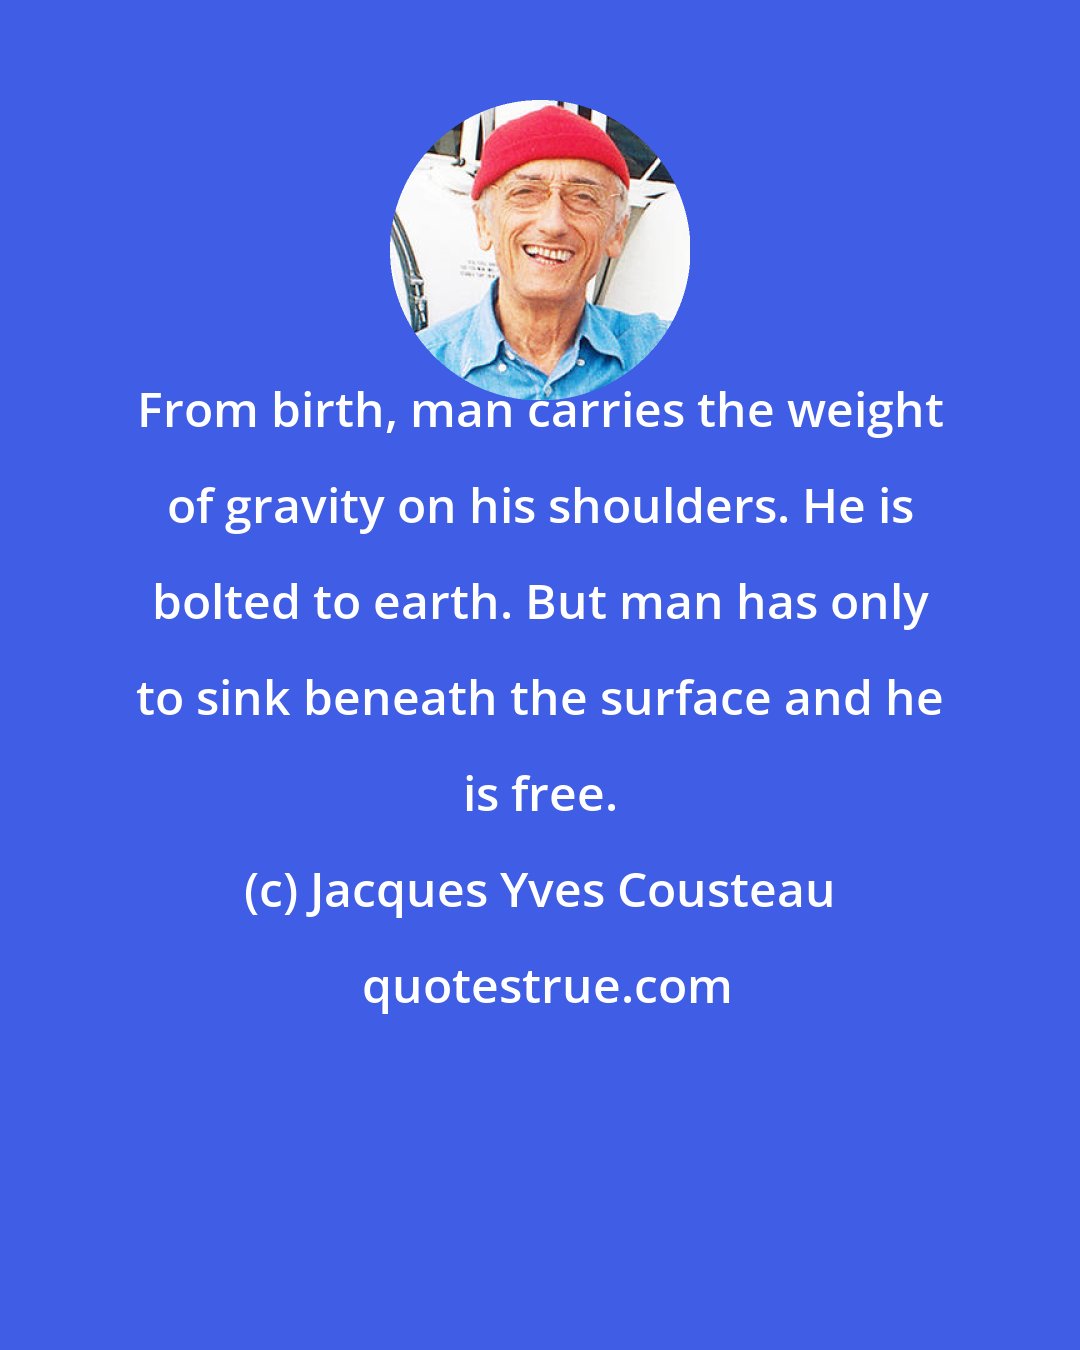 Jacques Yves Cousteau: From birth, man carries the weight of gravity on his shoulders. He is bolted to earth. But man has only to sink beneath the surface and he is free.